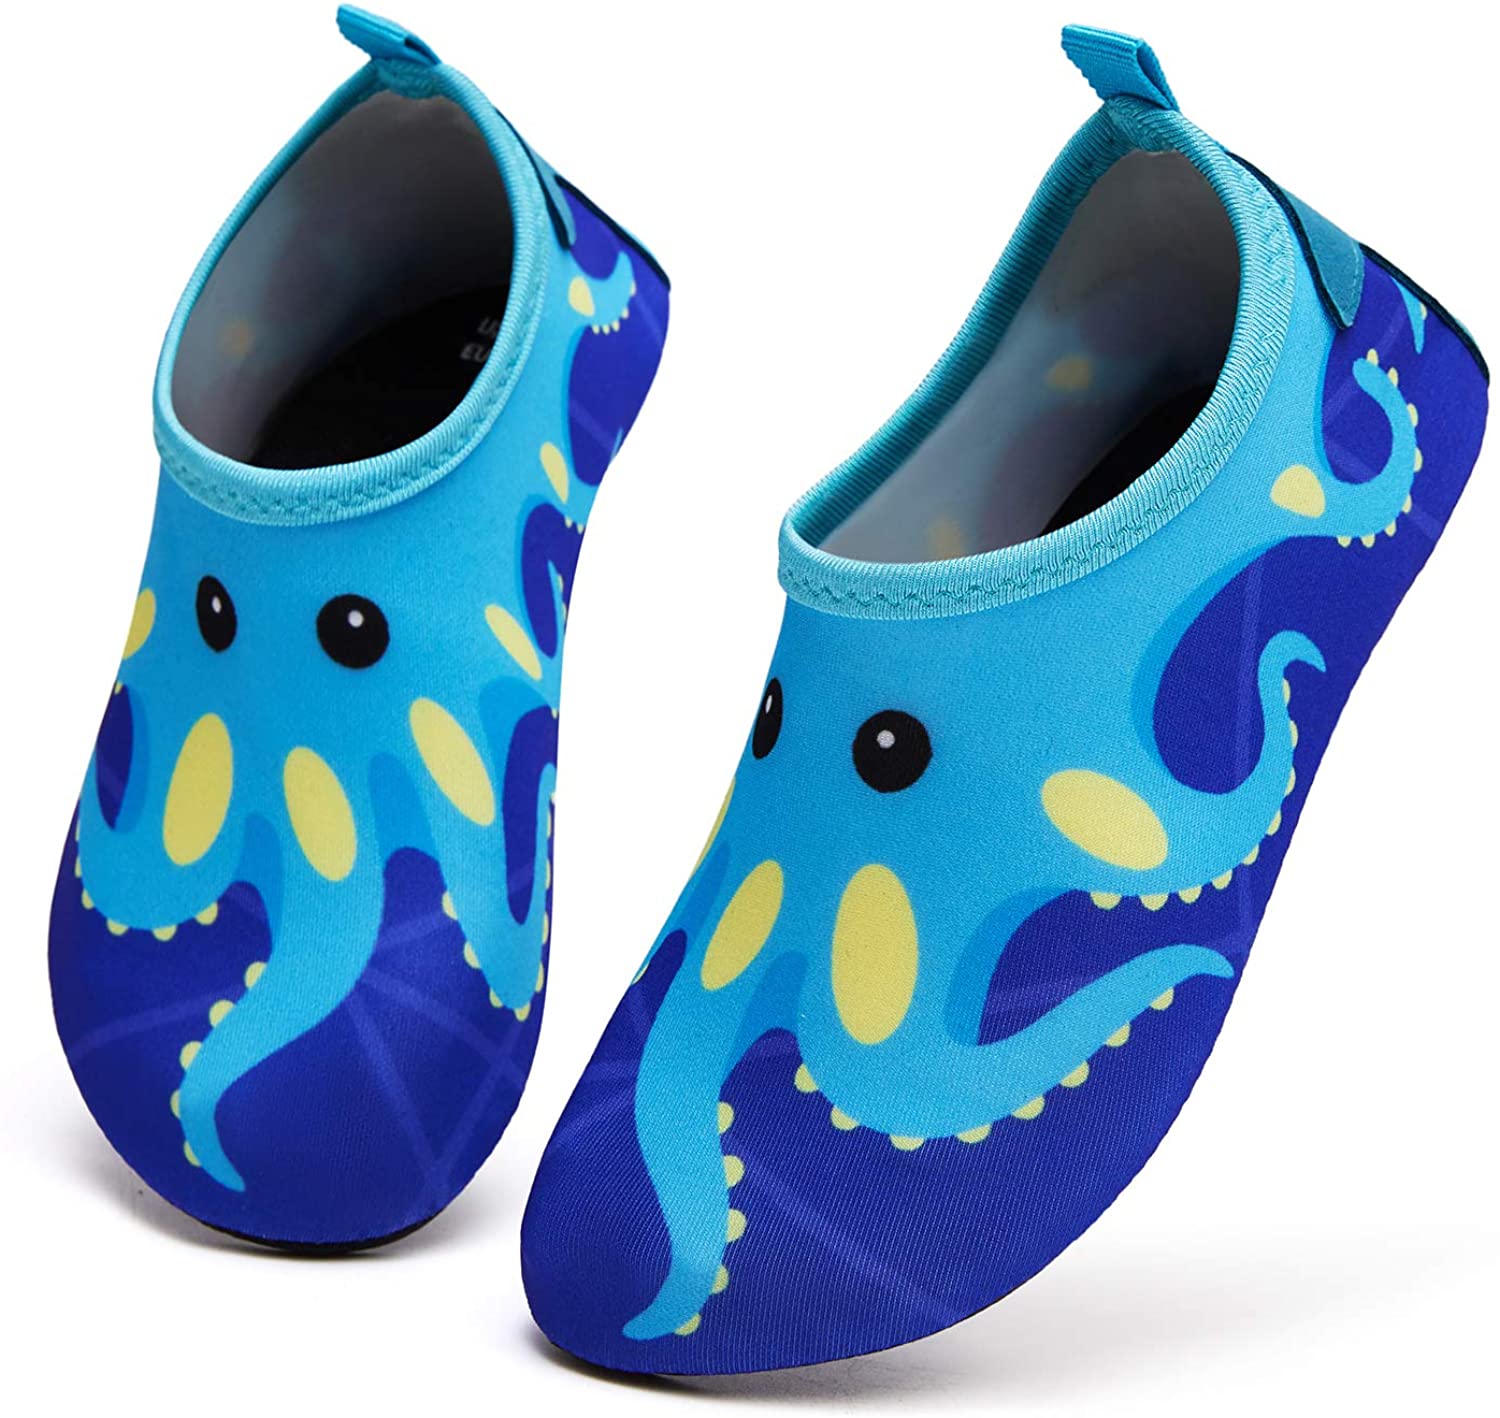 mysoft Kids Water Shoes Quick Dry Non-Slip Toddler Water Skin Barefoot Sports Swimming Beach Pool Shoes for Boys & Girls